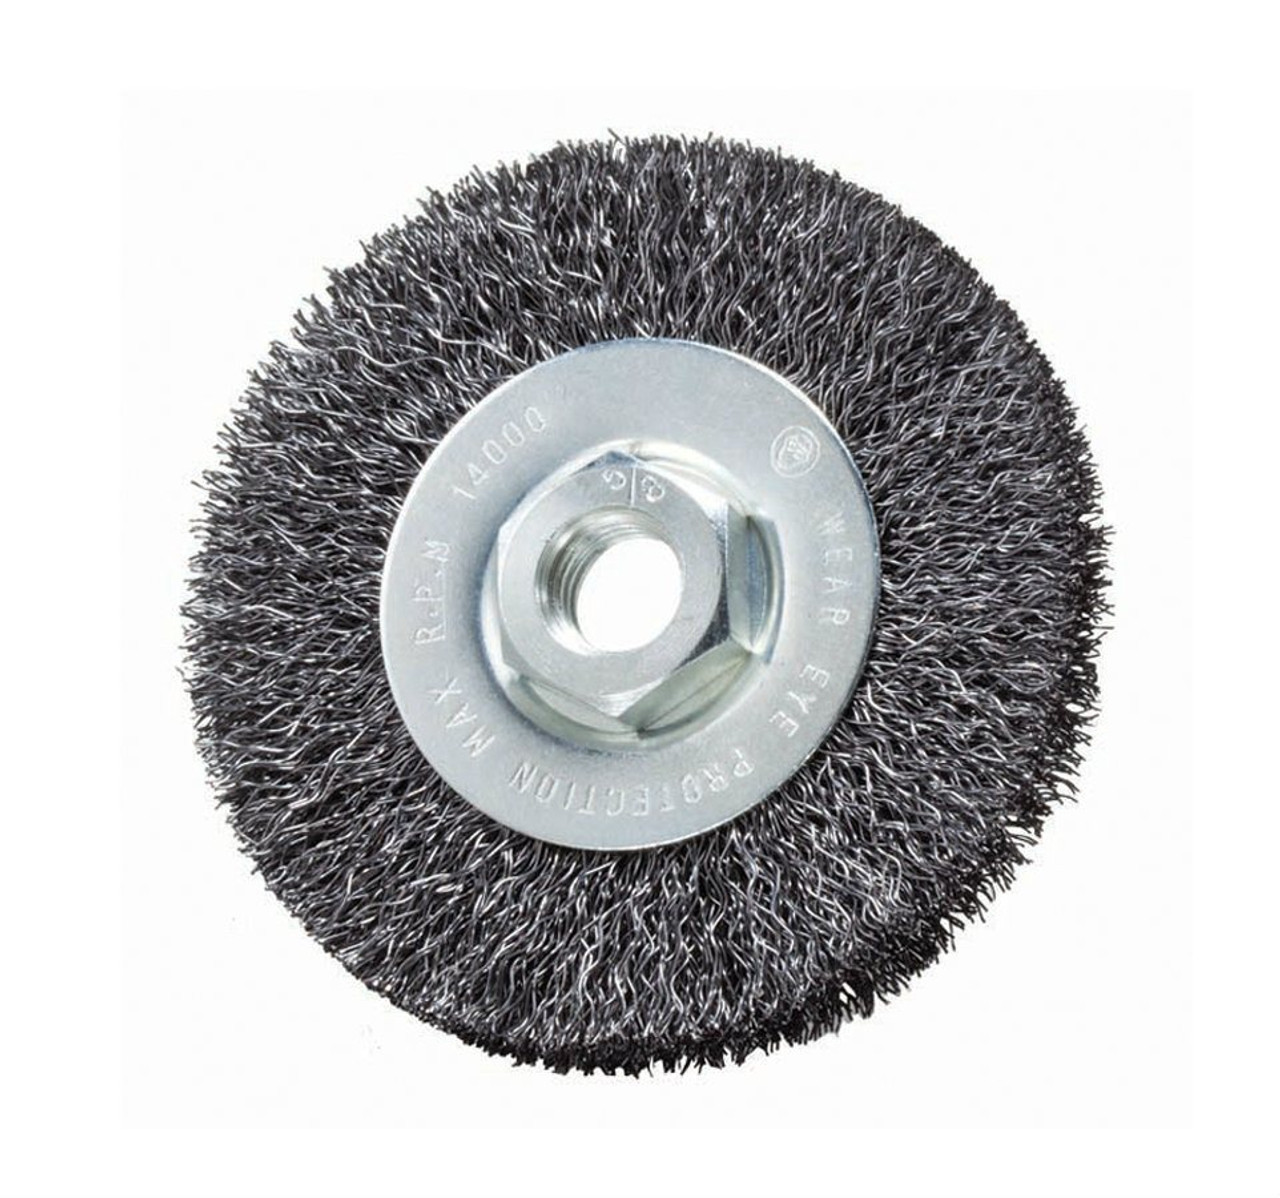 4 x 5/8-11 Crimped Wire Wheel Brush for Angle Grinder (Carbon Steel)